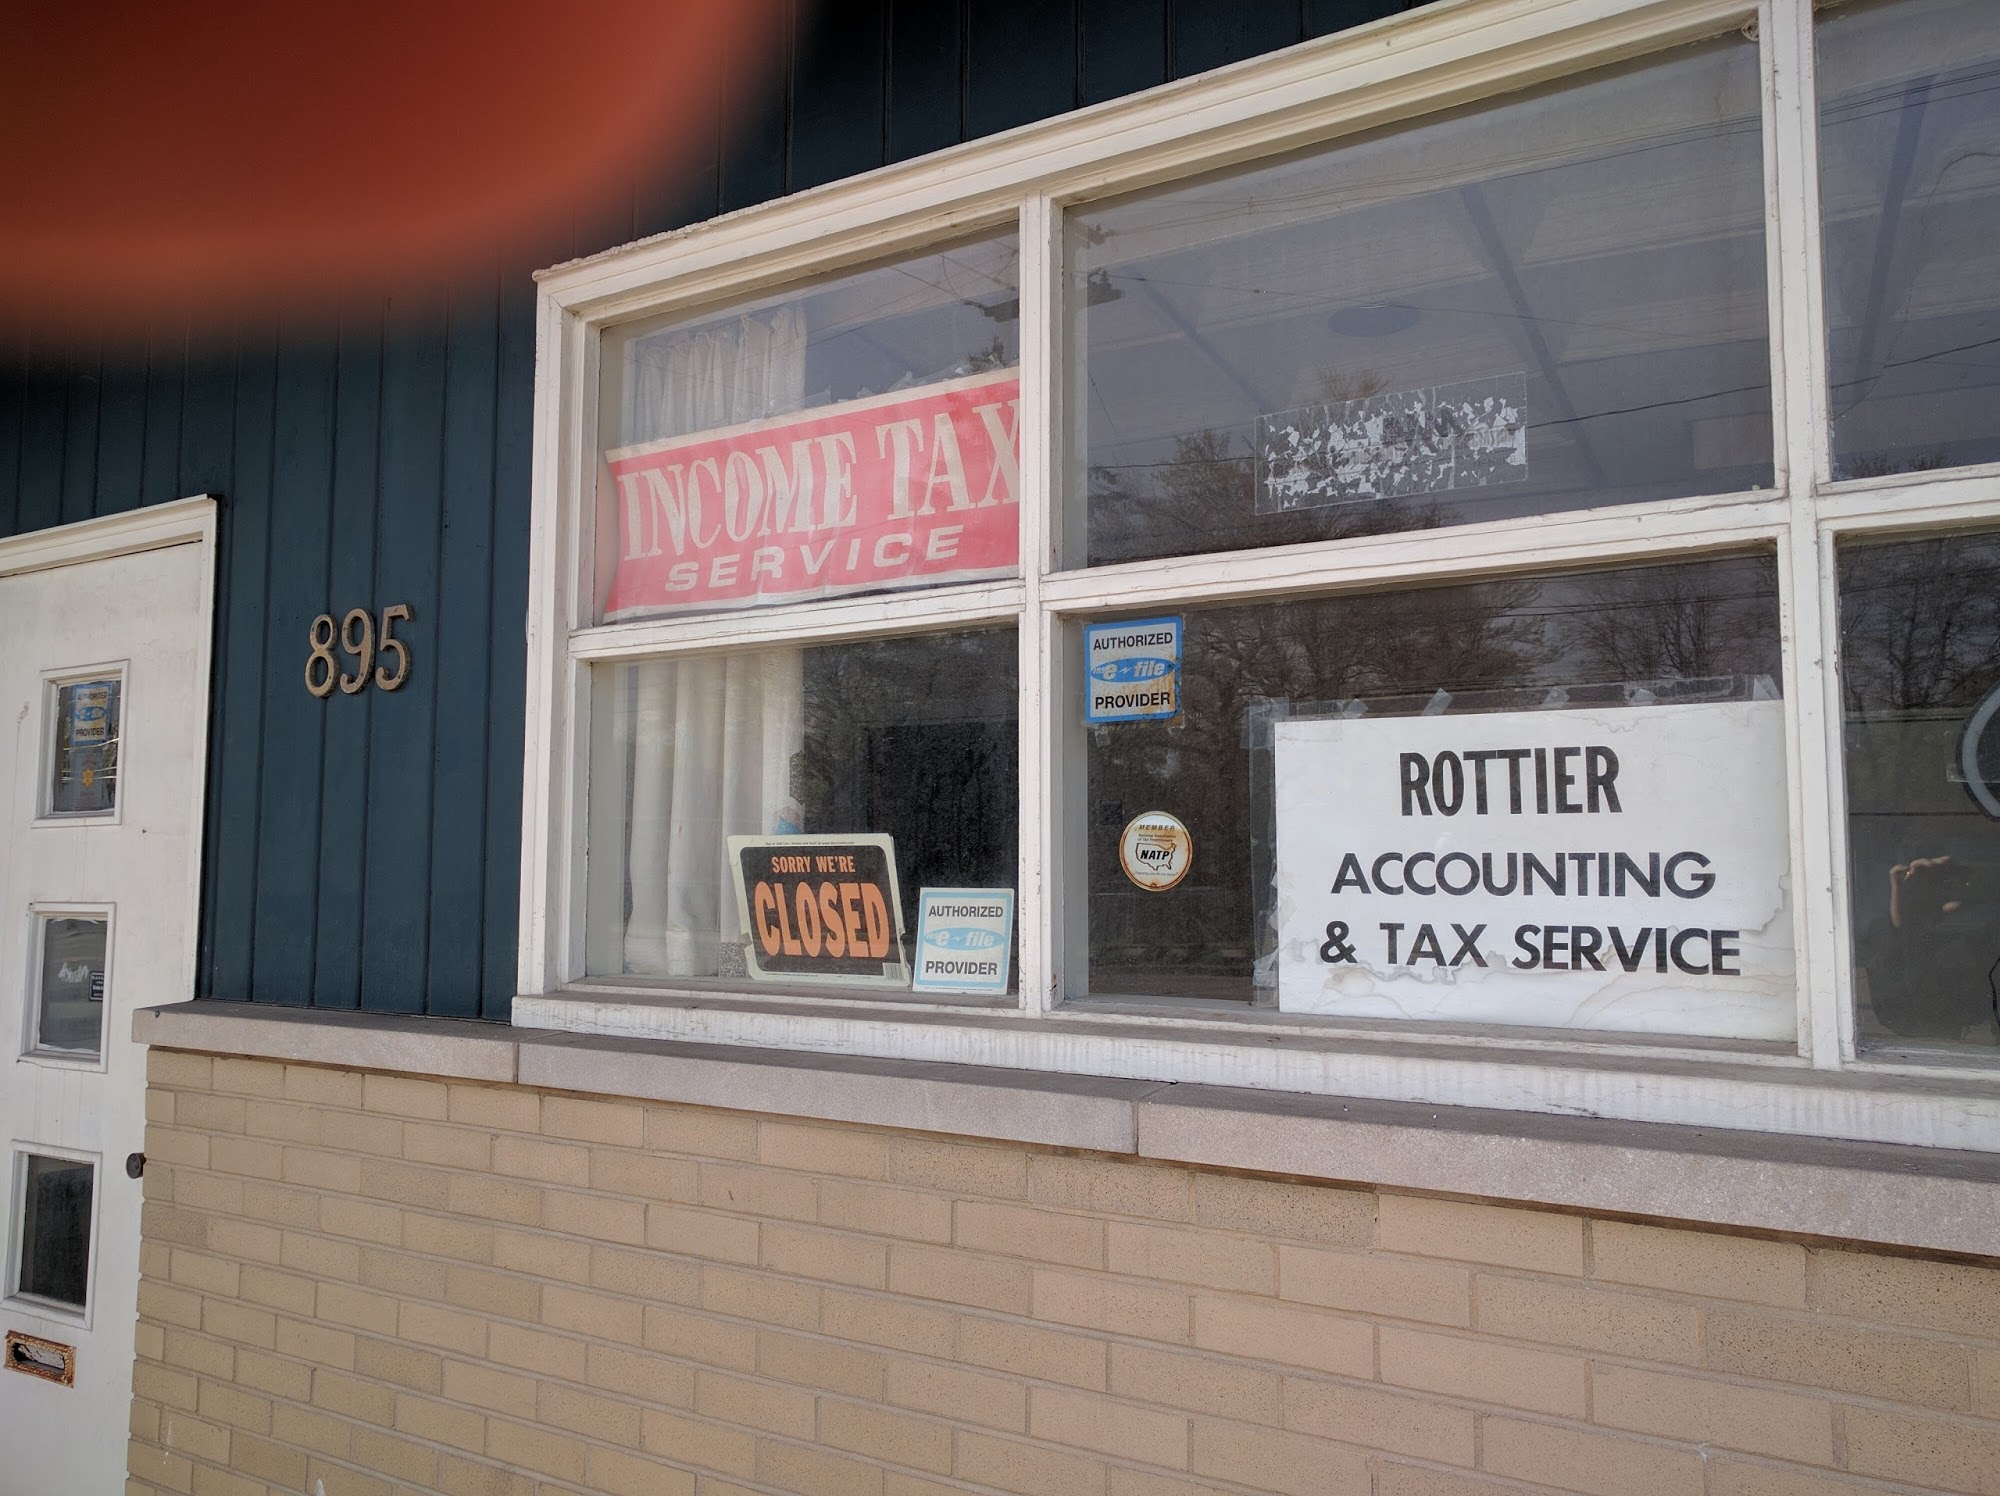 Rottier Accounting & Tax Services